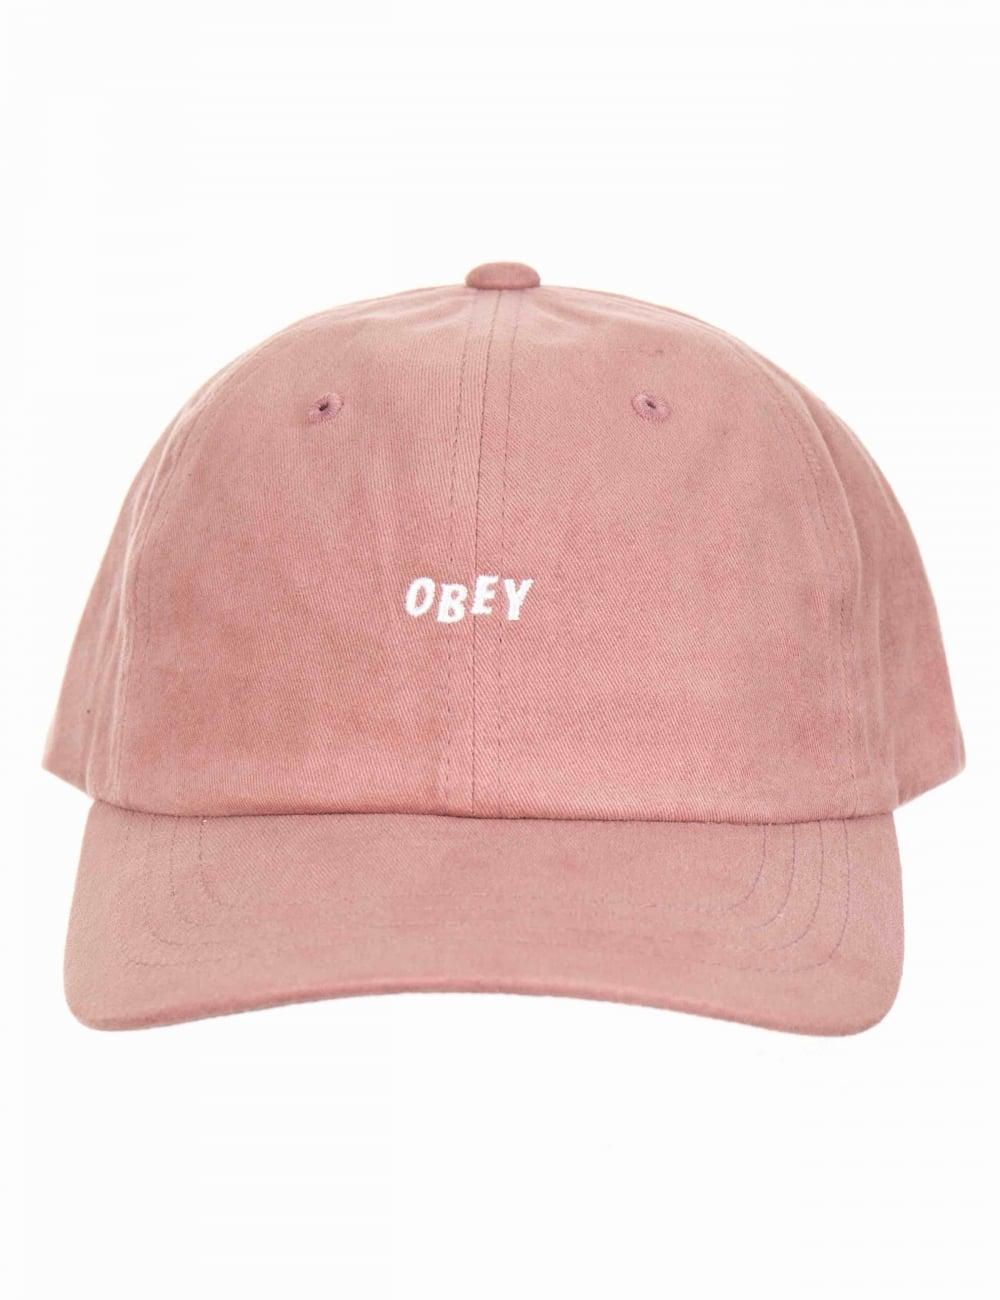 OBEY Clothing Rose Logo - Obey Clothing Jumble Bar III 6 Panel Hat - Rose - Obey Clothing from ...